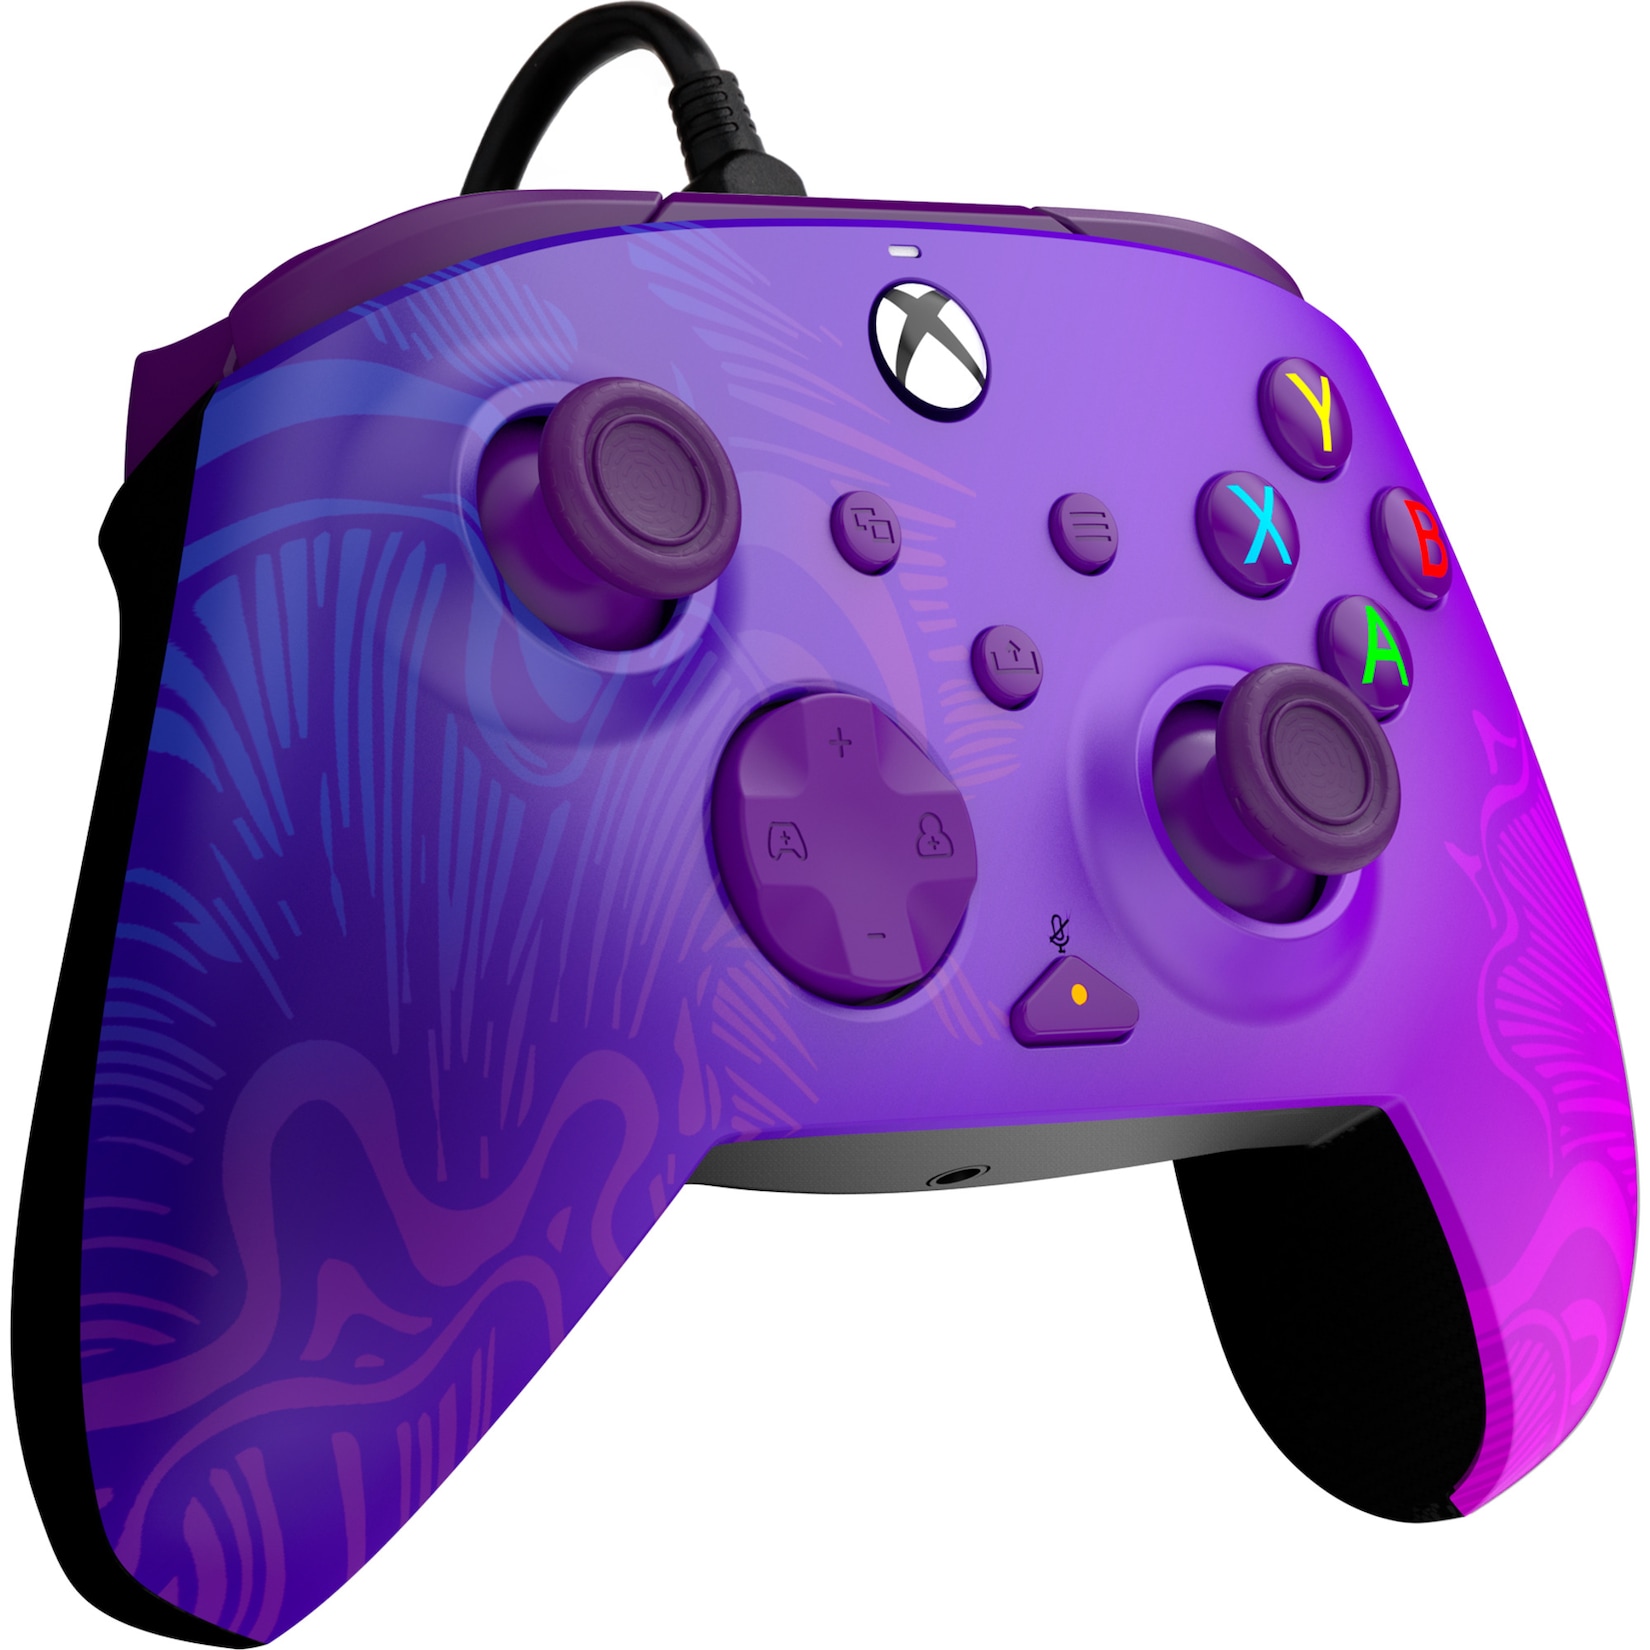 pdp Gamepad Rematch Advanced Wired Controller - Purple Fade